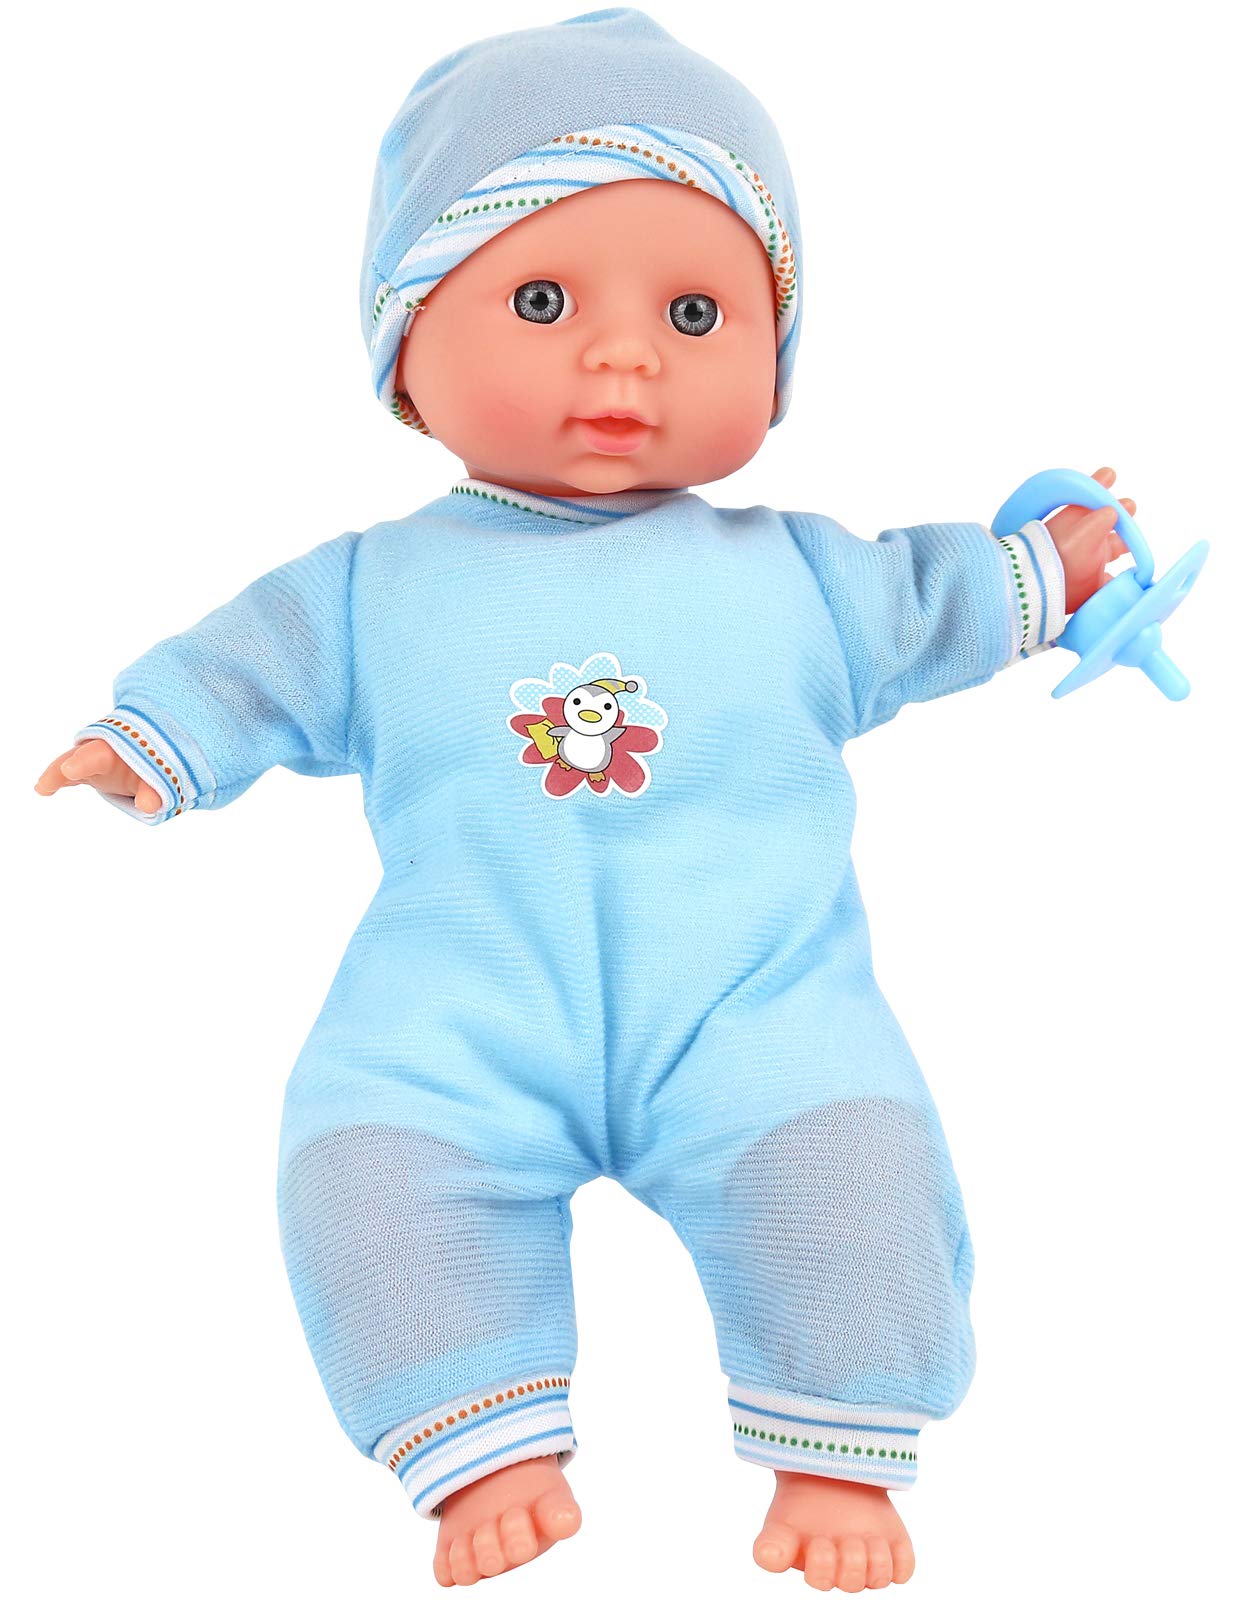 Click N' Play Realistic Baby Boy Doll with Removable Blue Outfit and Hat with Pacifier, 12 Inch Fake Baby Doll, for 2+ Year Old Girls and Boys, Toys